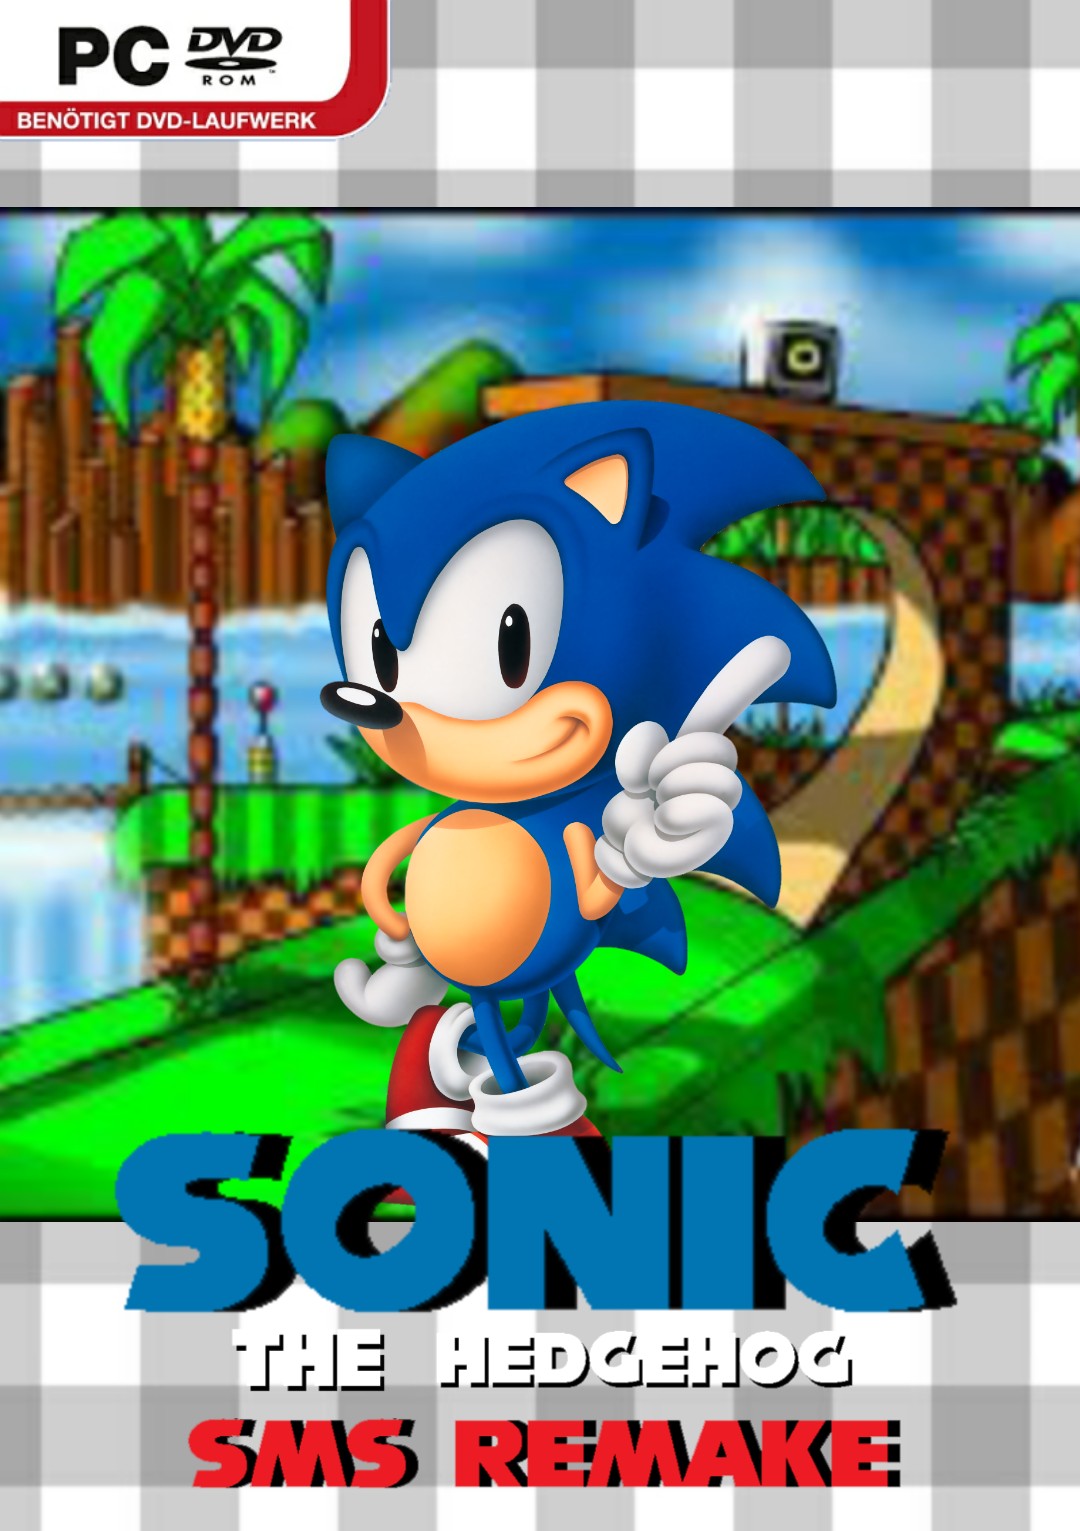 Another Sonic fan game is up on Xbox: Sonic 1 SMS Remake! #sonic